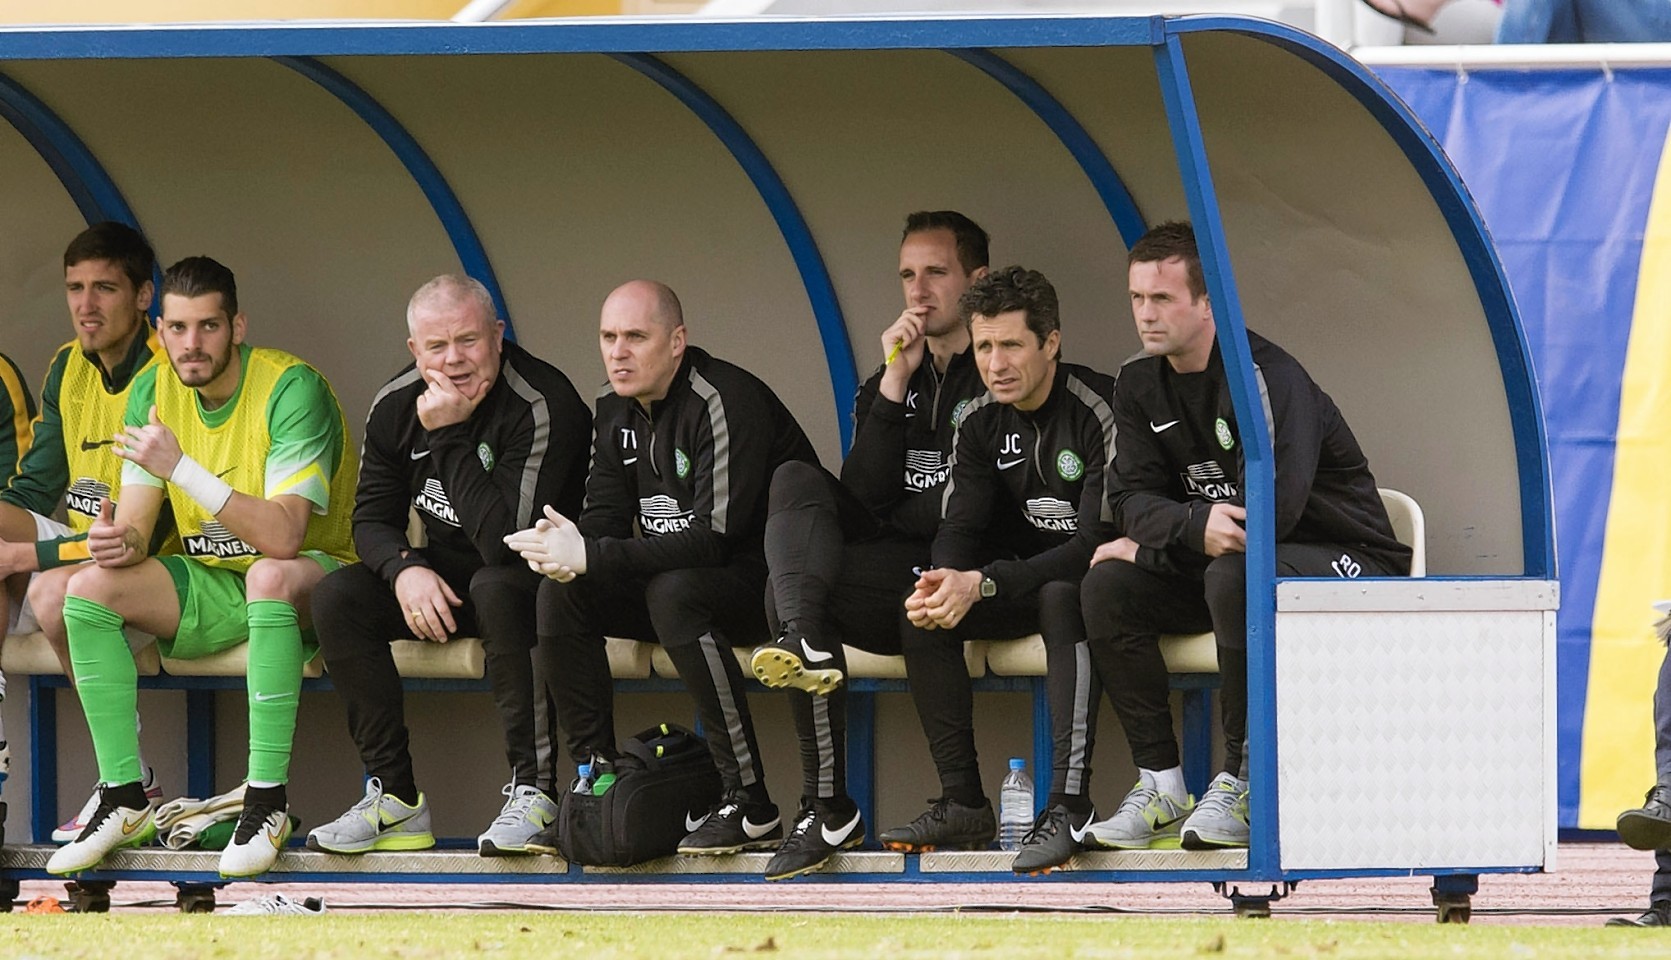 While the rest of us have been putting up with snow and cold conditions, Celtic have been playing in Gran Canaria